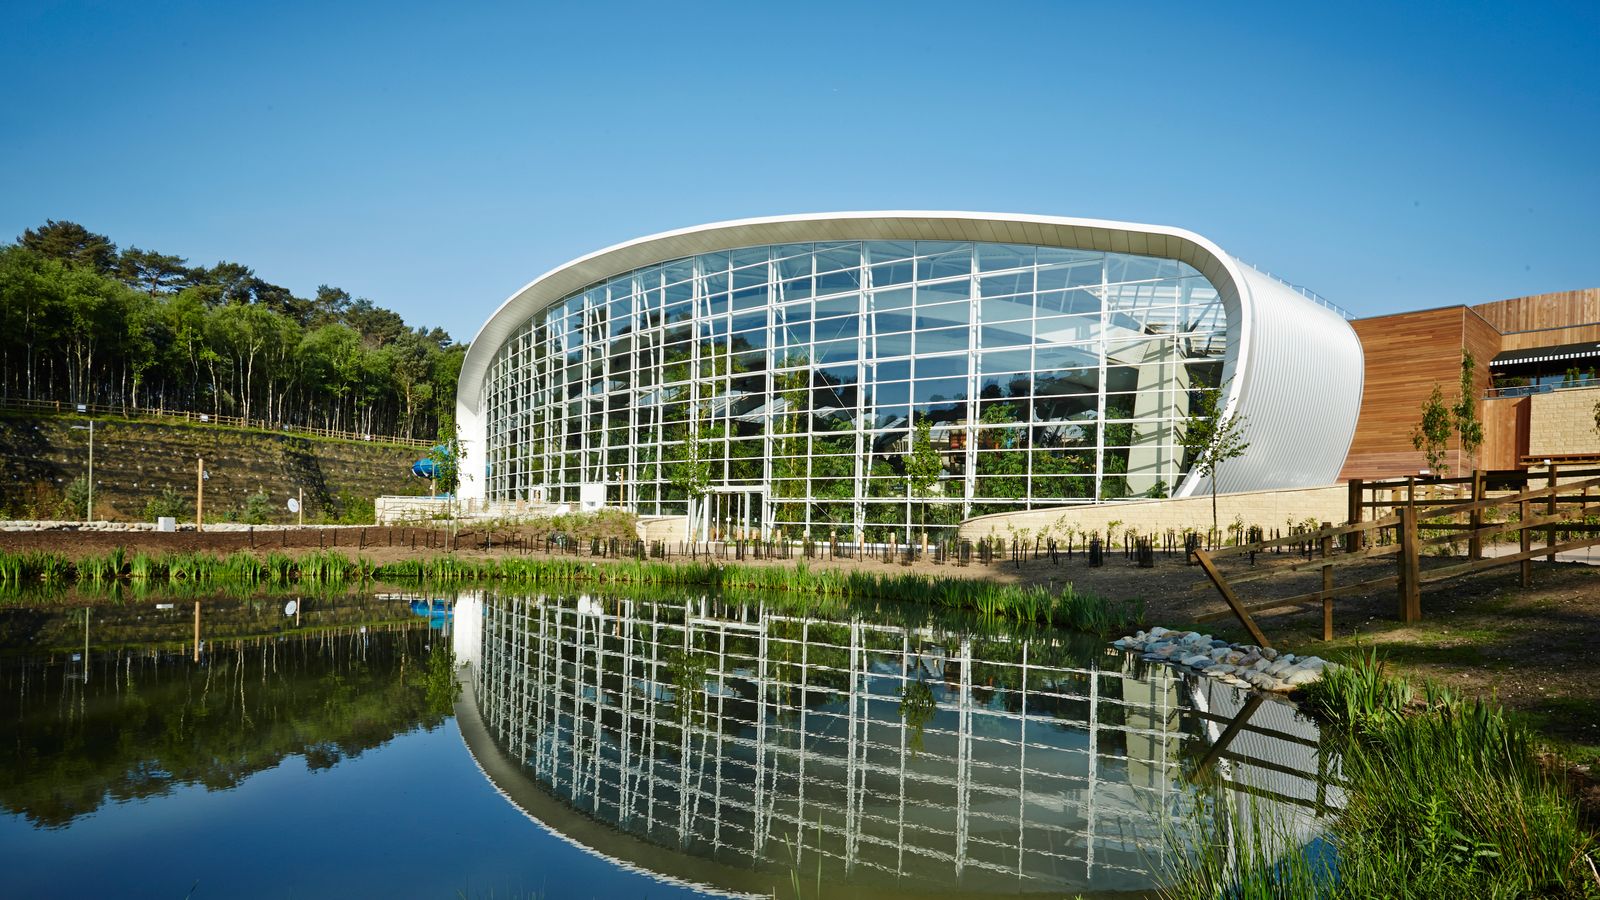 Center Parcs owner in talks with new investors over stake sale